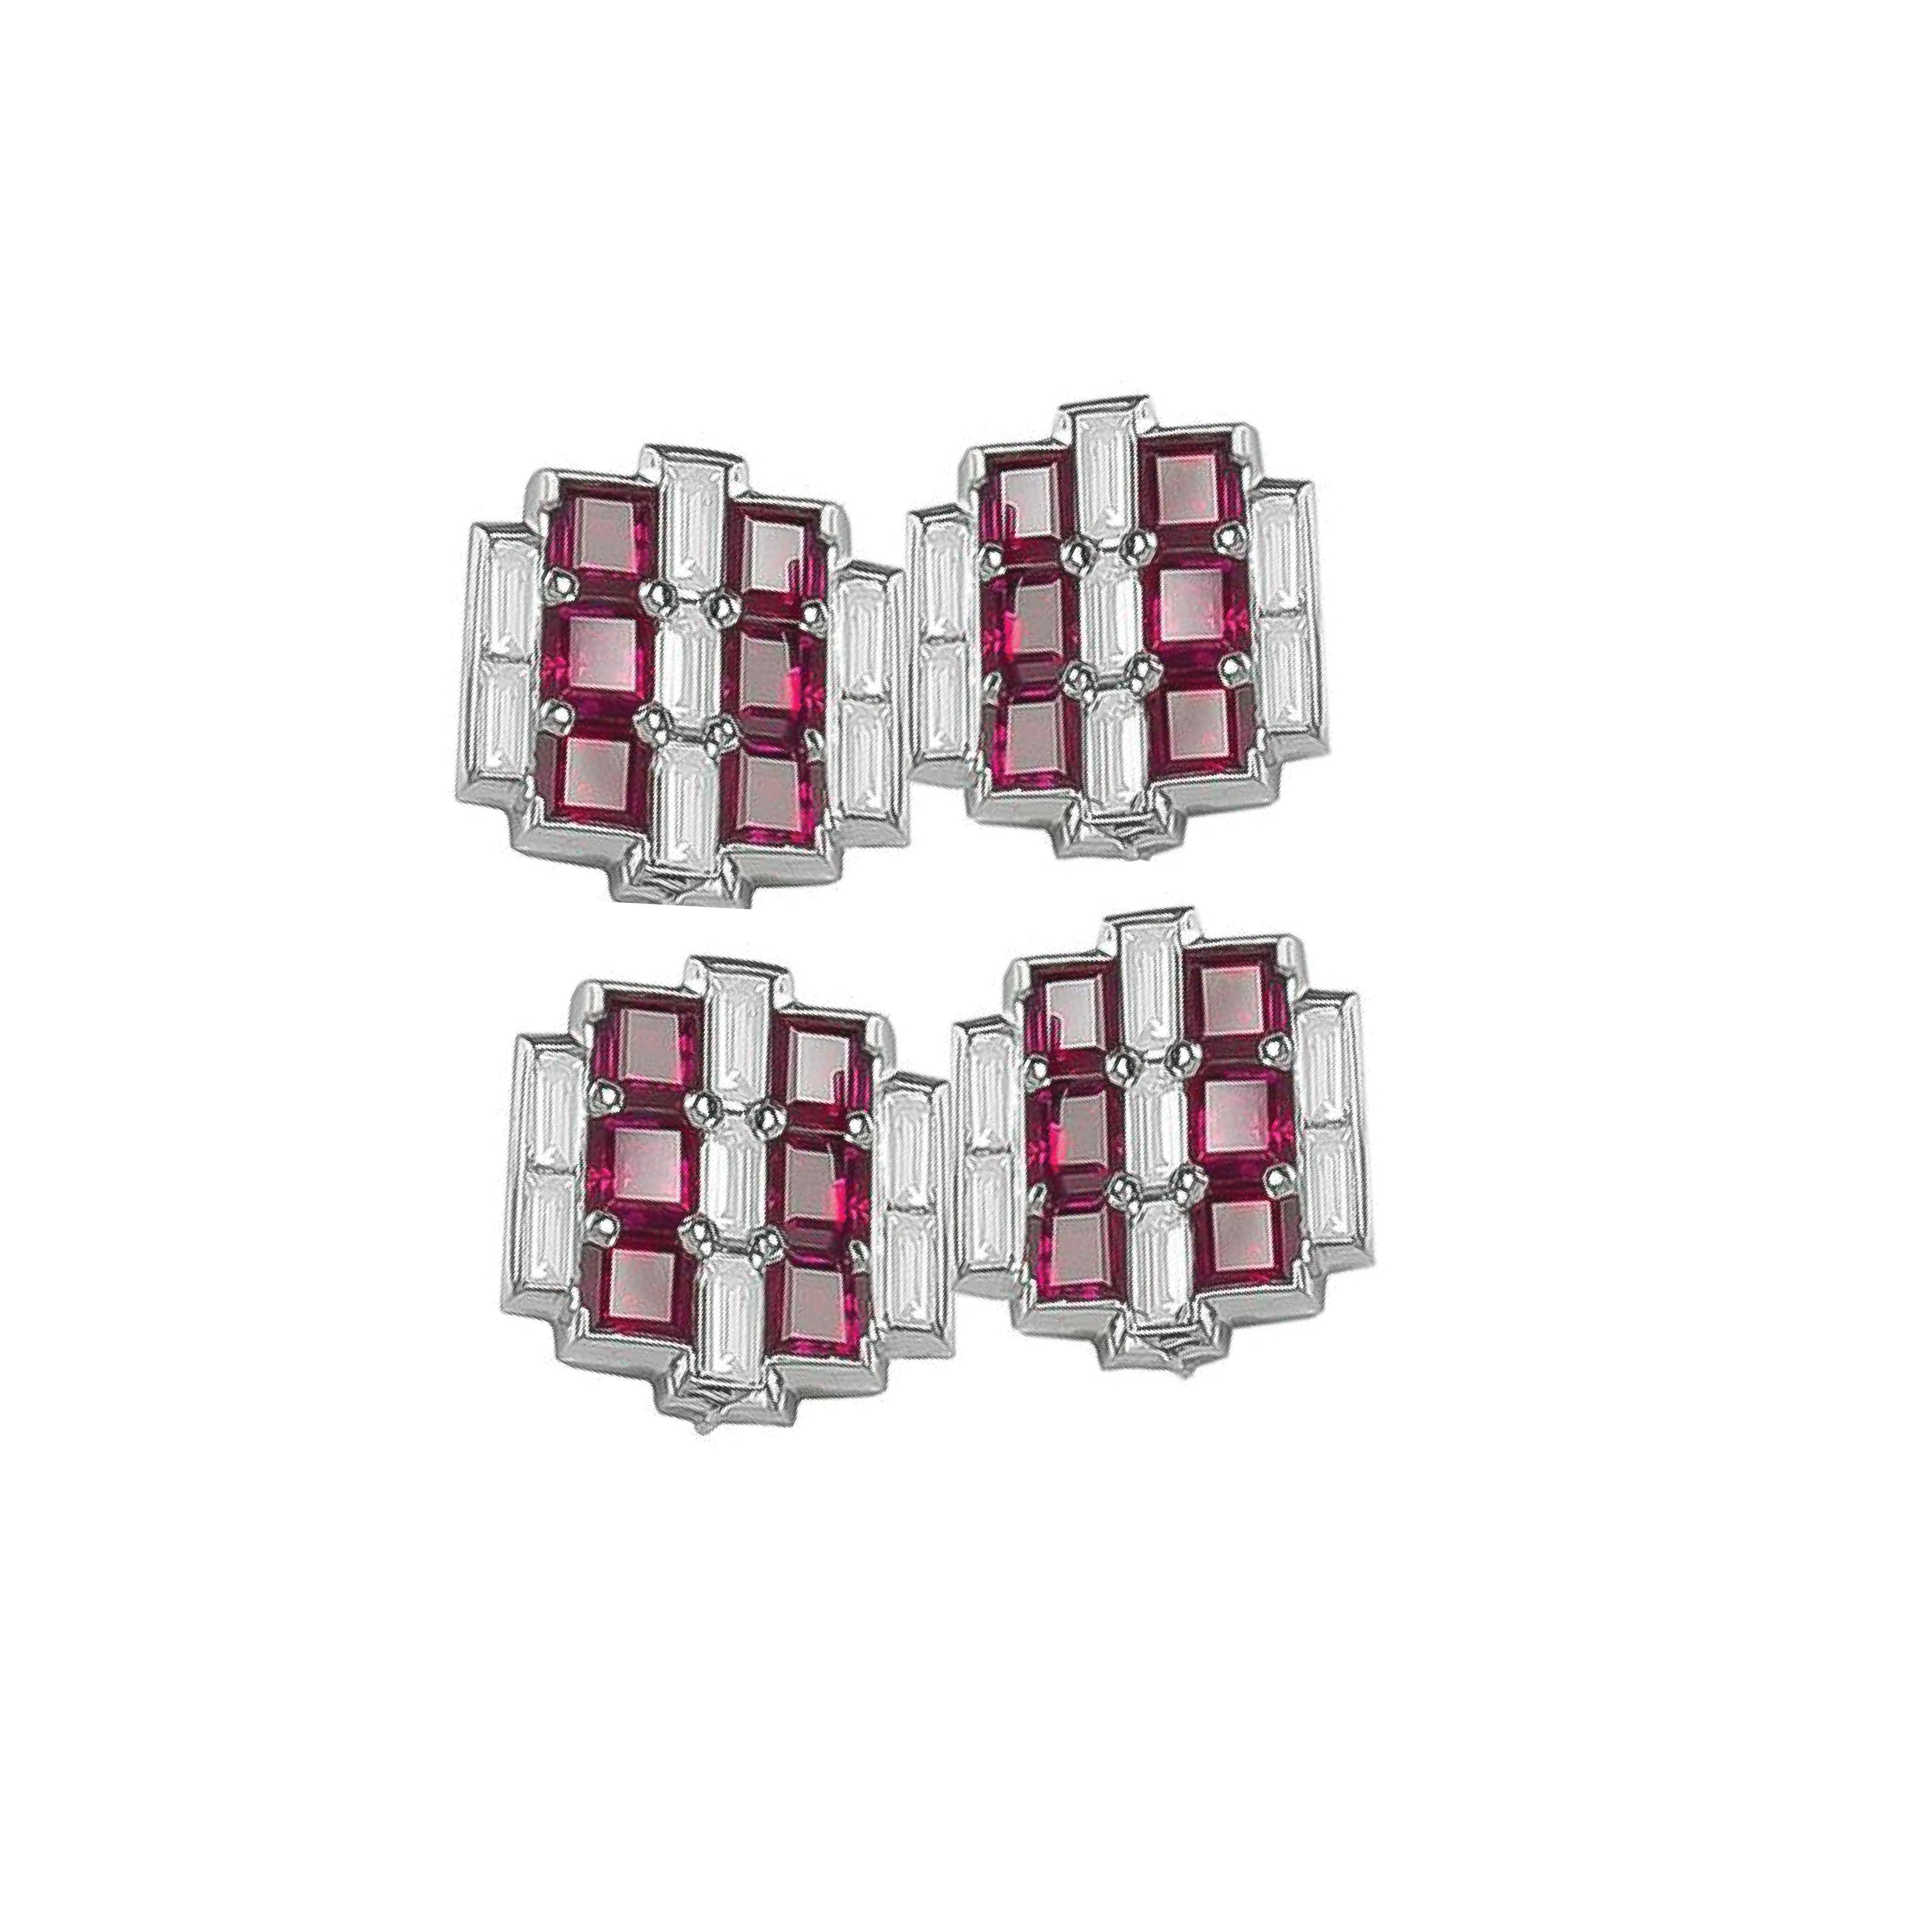 Elegant Platinum Set Cufflinks by Sophia D with Rubies weighing 5.85 carats and Diamonds weighing a total 1.45 carats.

Sophia D by Joseph Dardashti LTD has been known worldwide for 35 years and are inspired by classic Art Deco design that merges